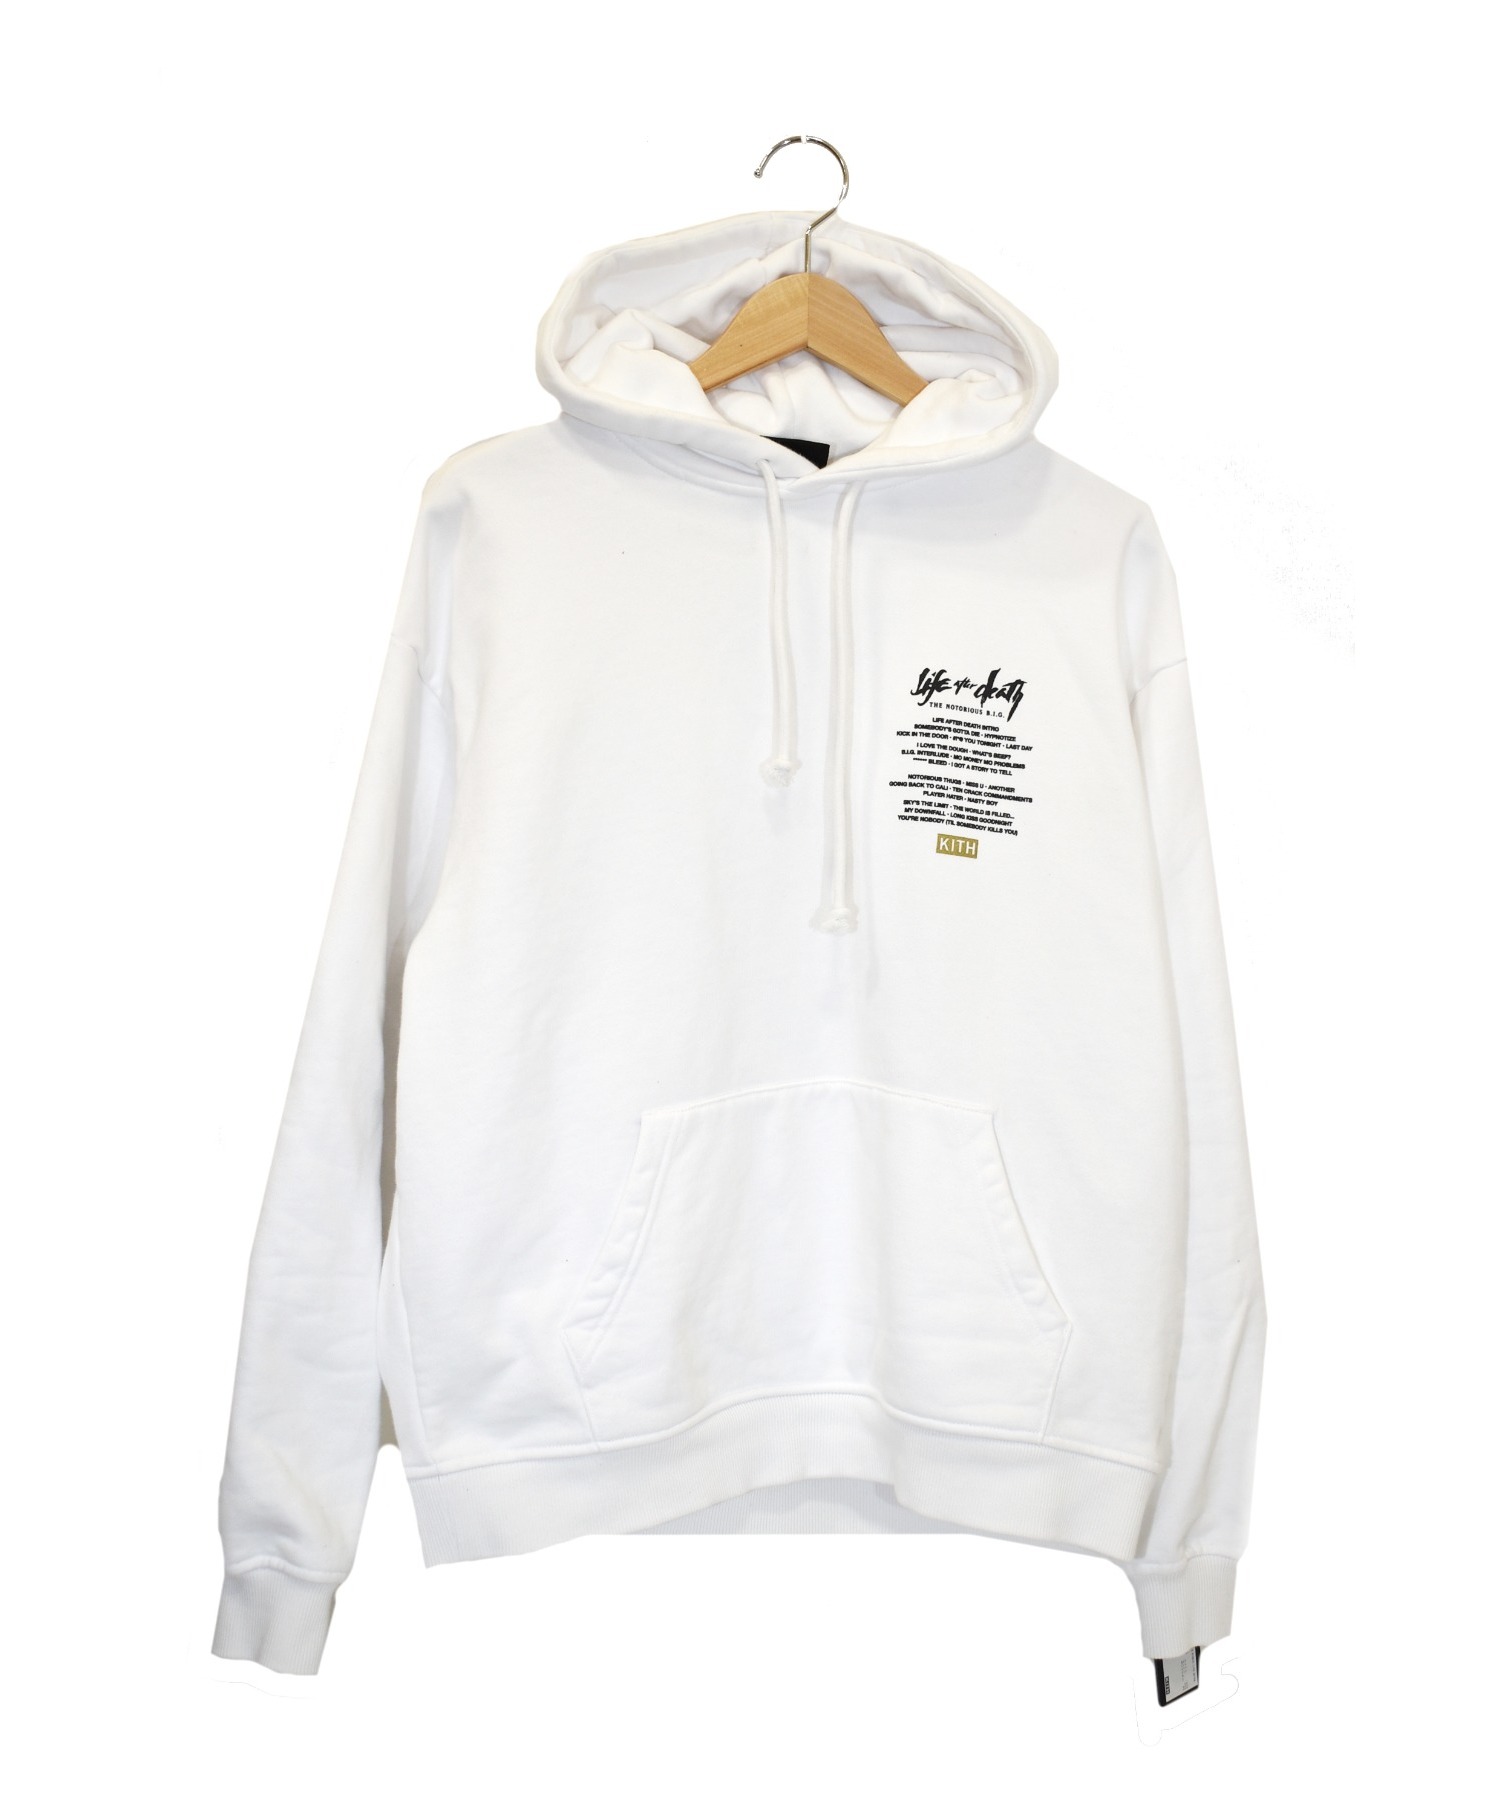 KITH キス The Notorious B.I.G. Hoodie パーカー